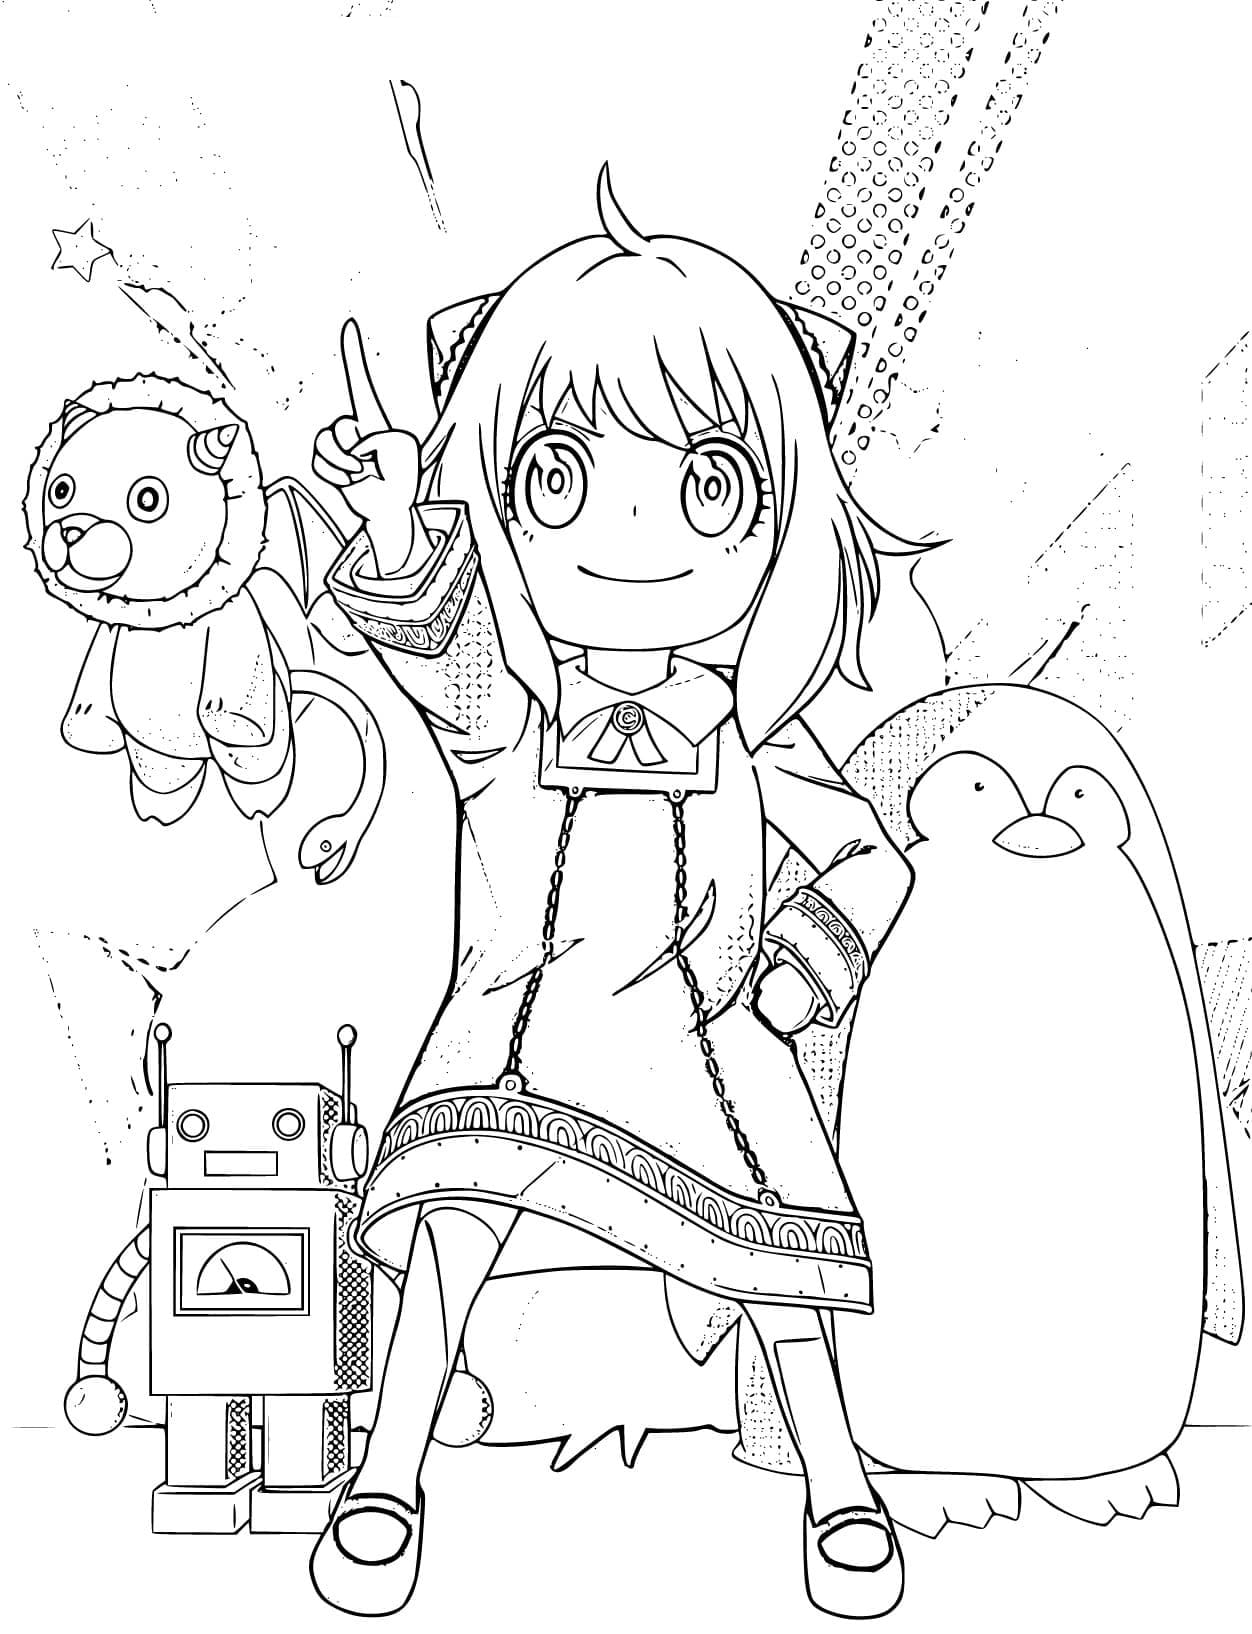 Anya de Spy x Family coloring page